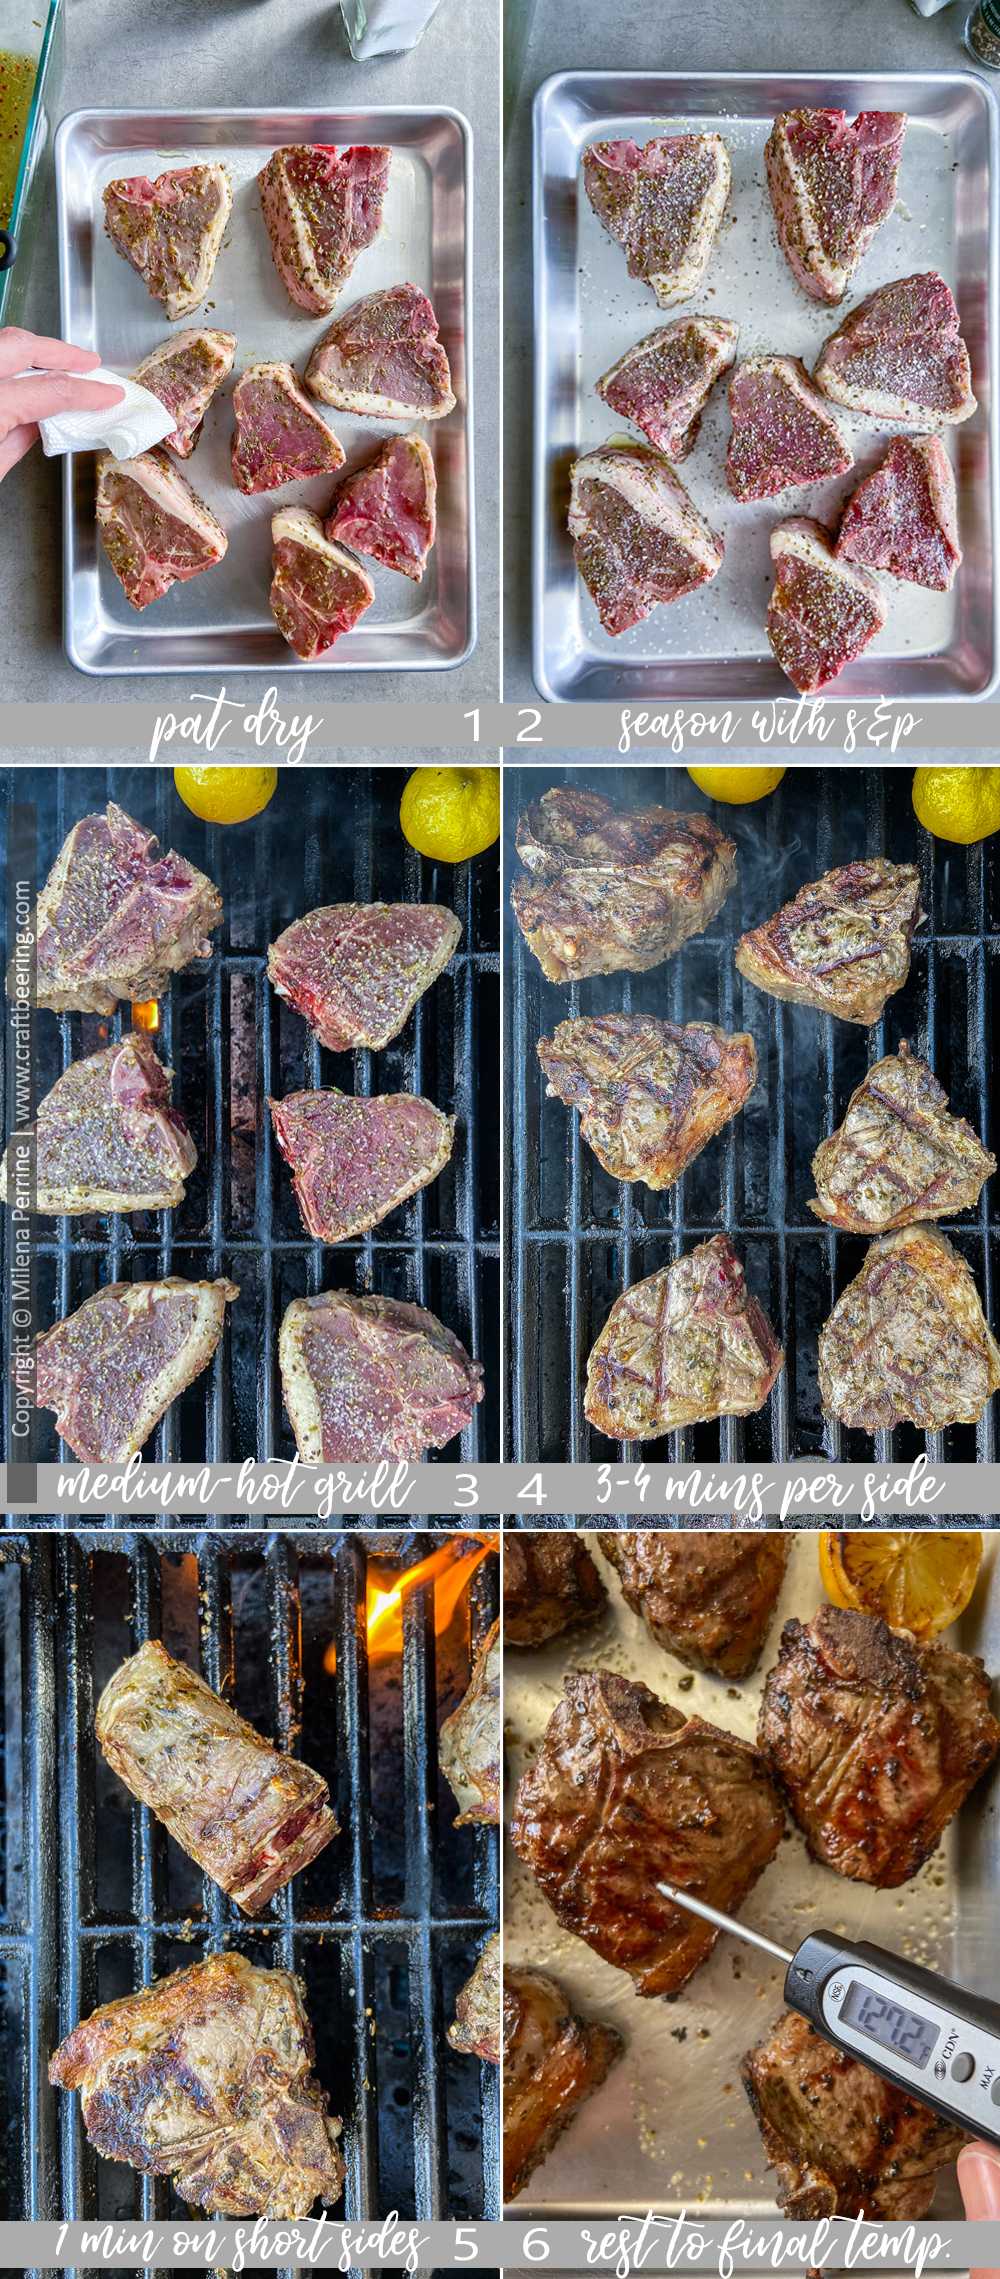 How to cook loin lamb chops on the grill